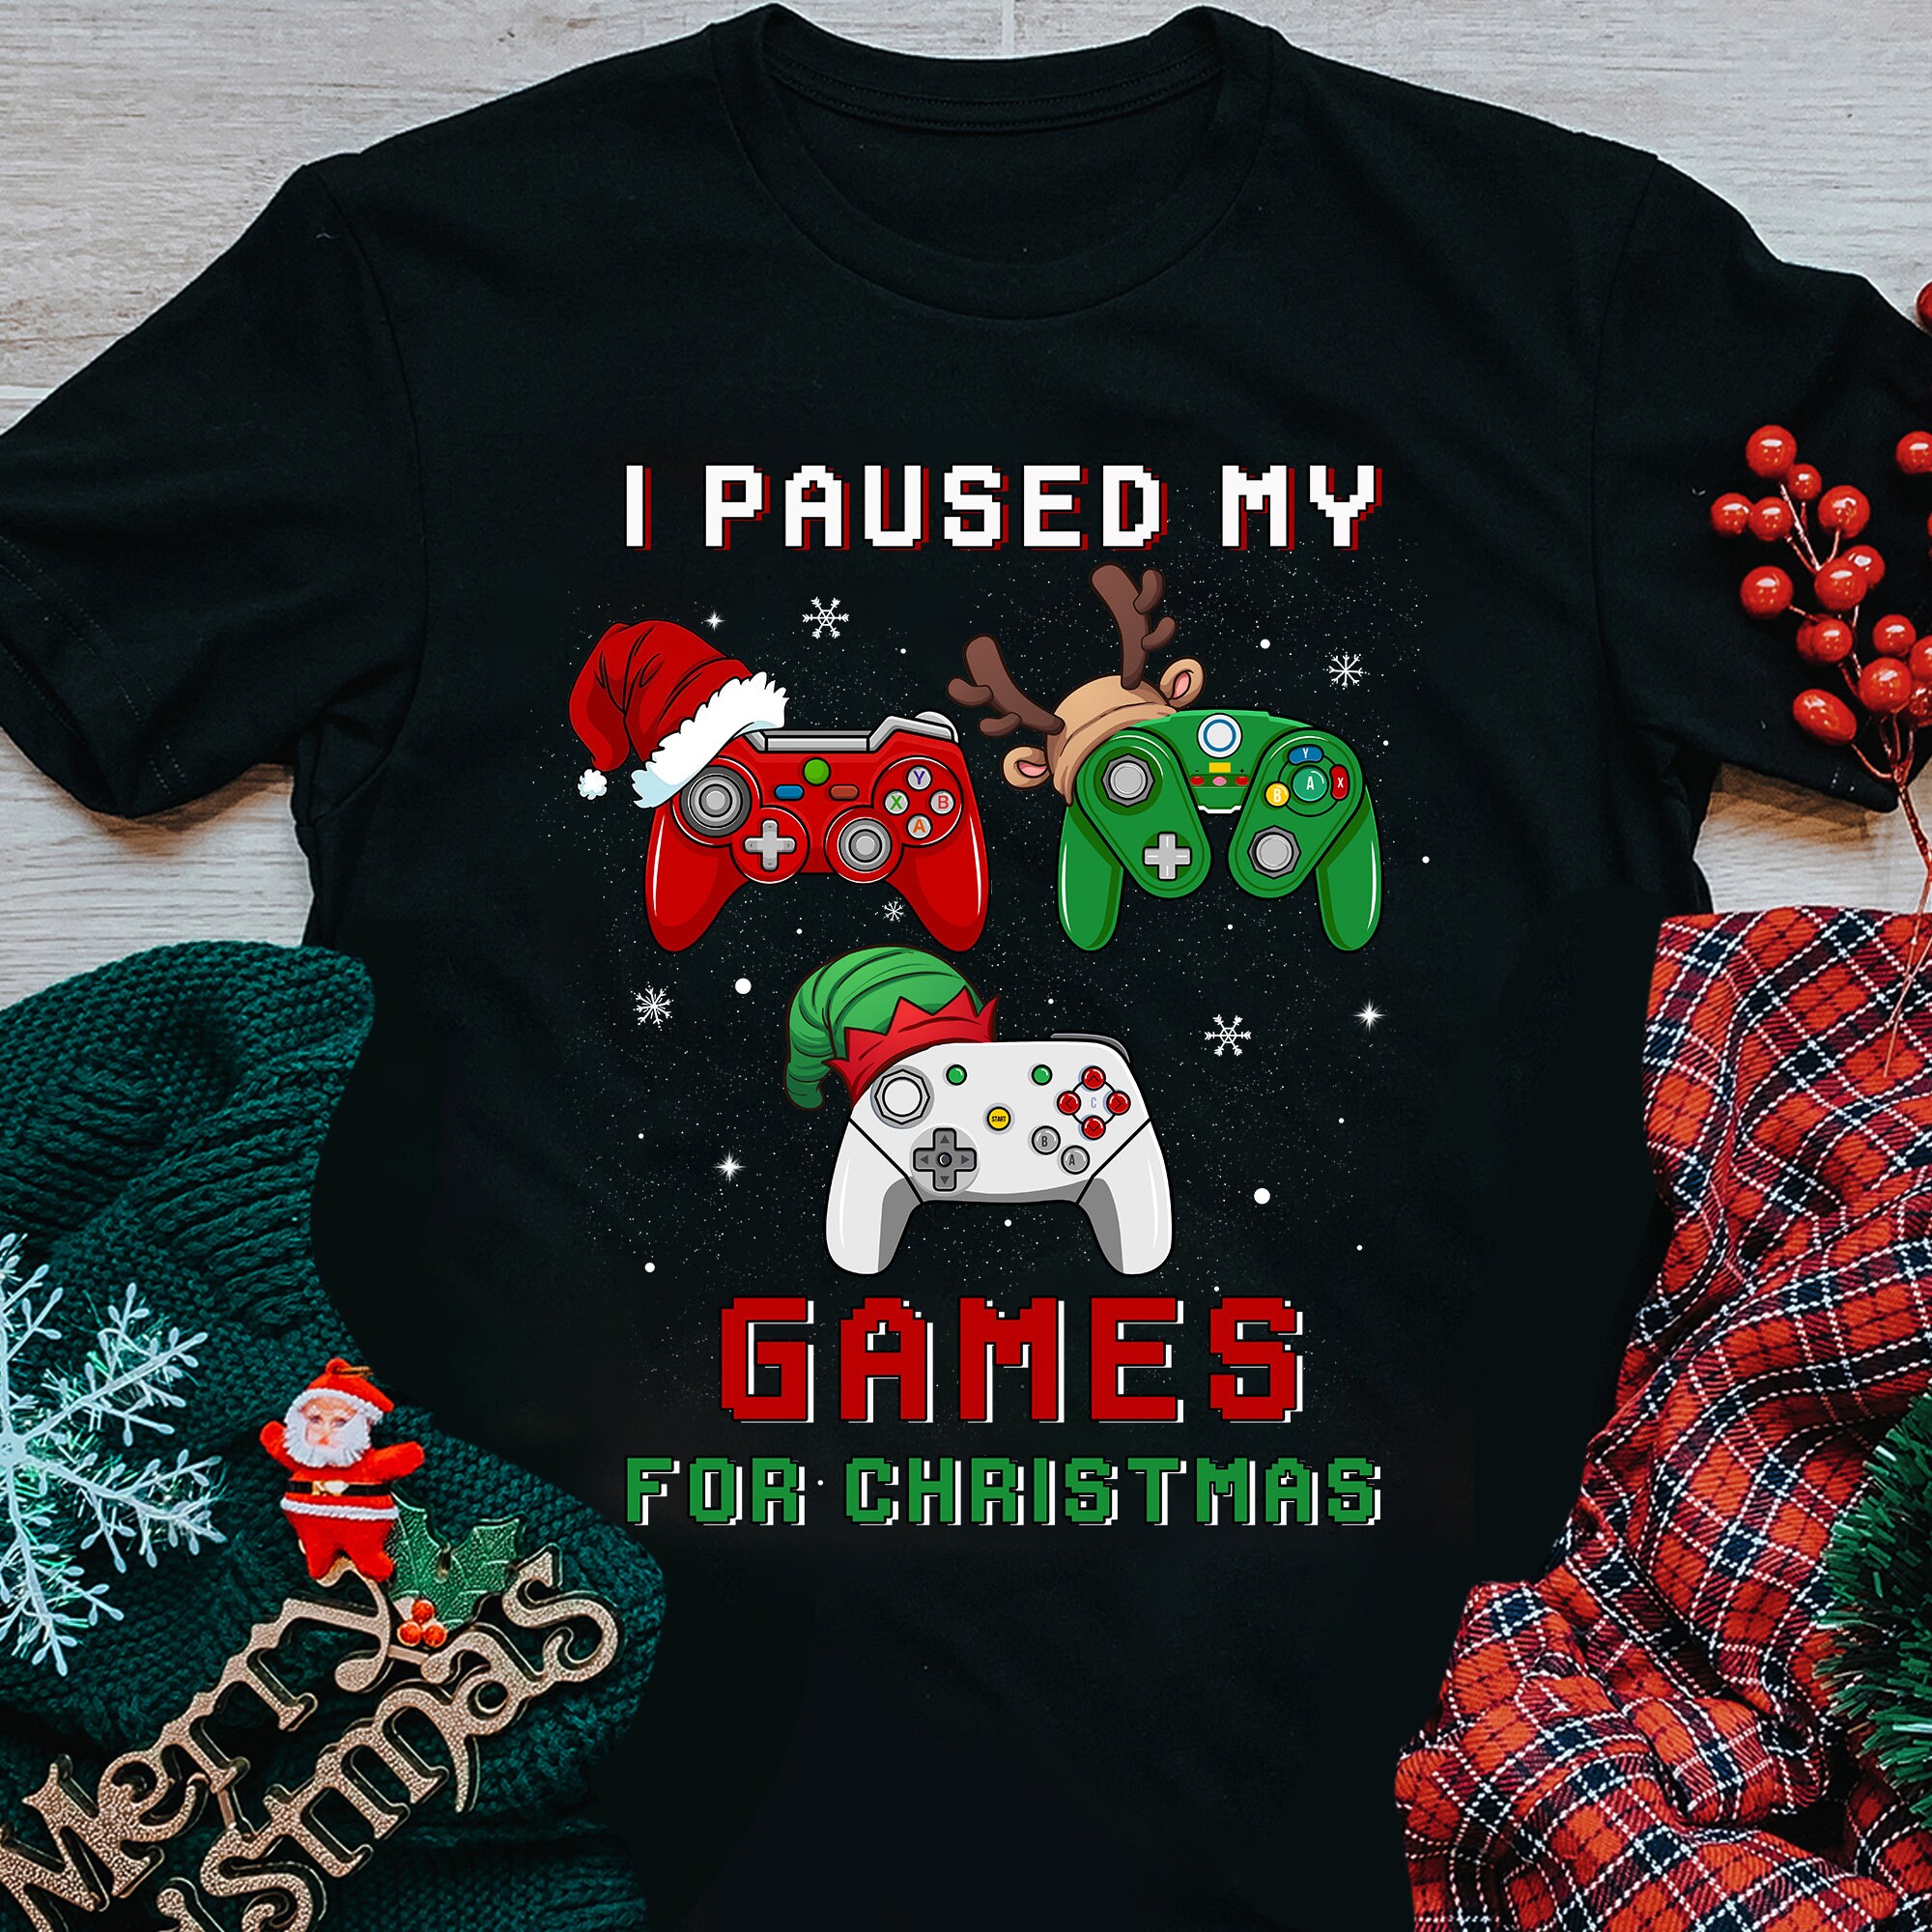 Discover I Paused My Game For Christmas T-Shirt